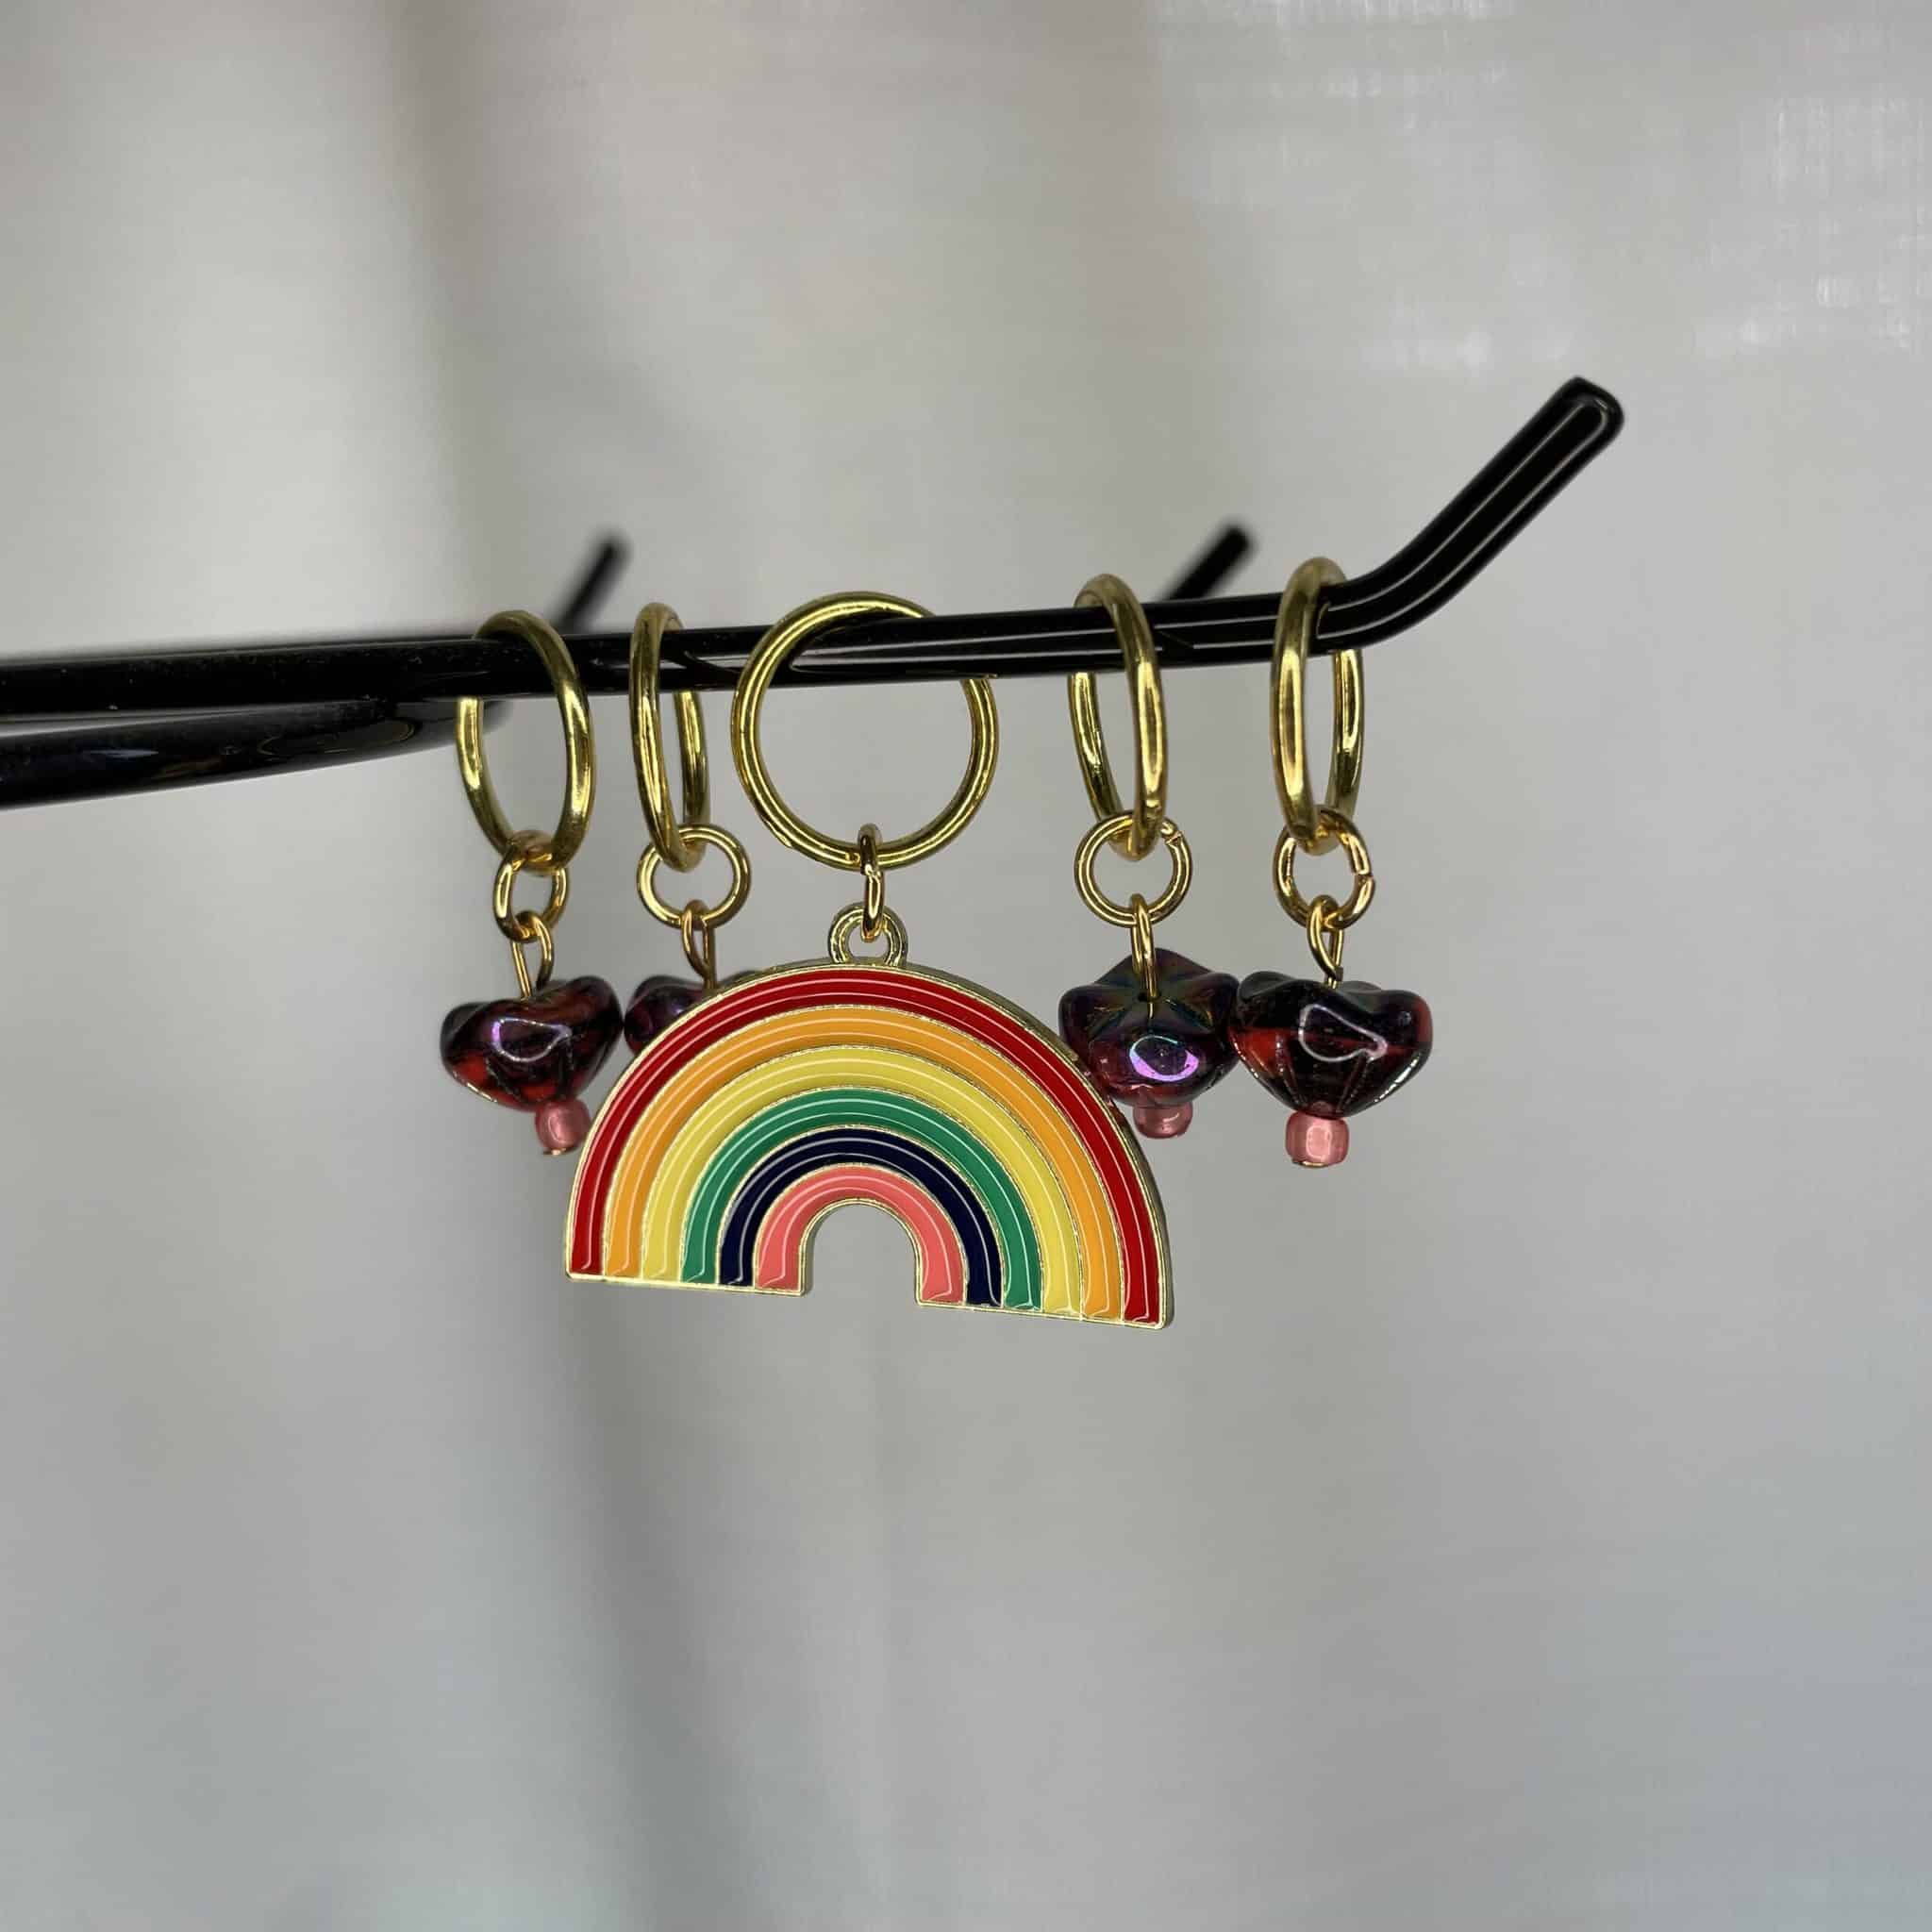 A rainbow surrounded by smaller beaded charms.